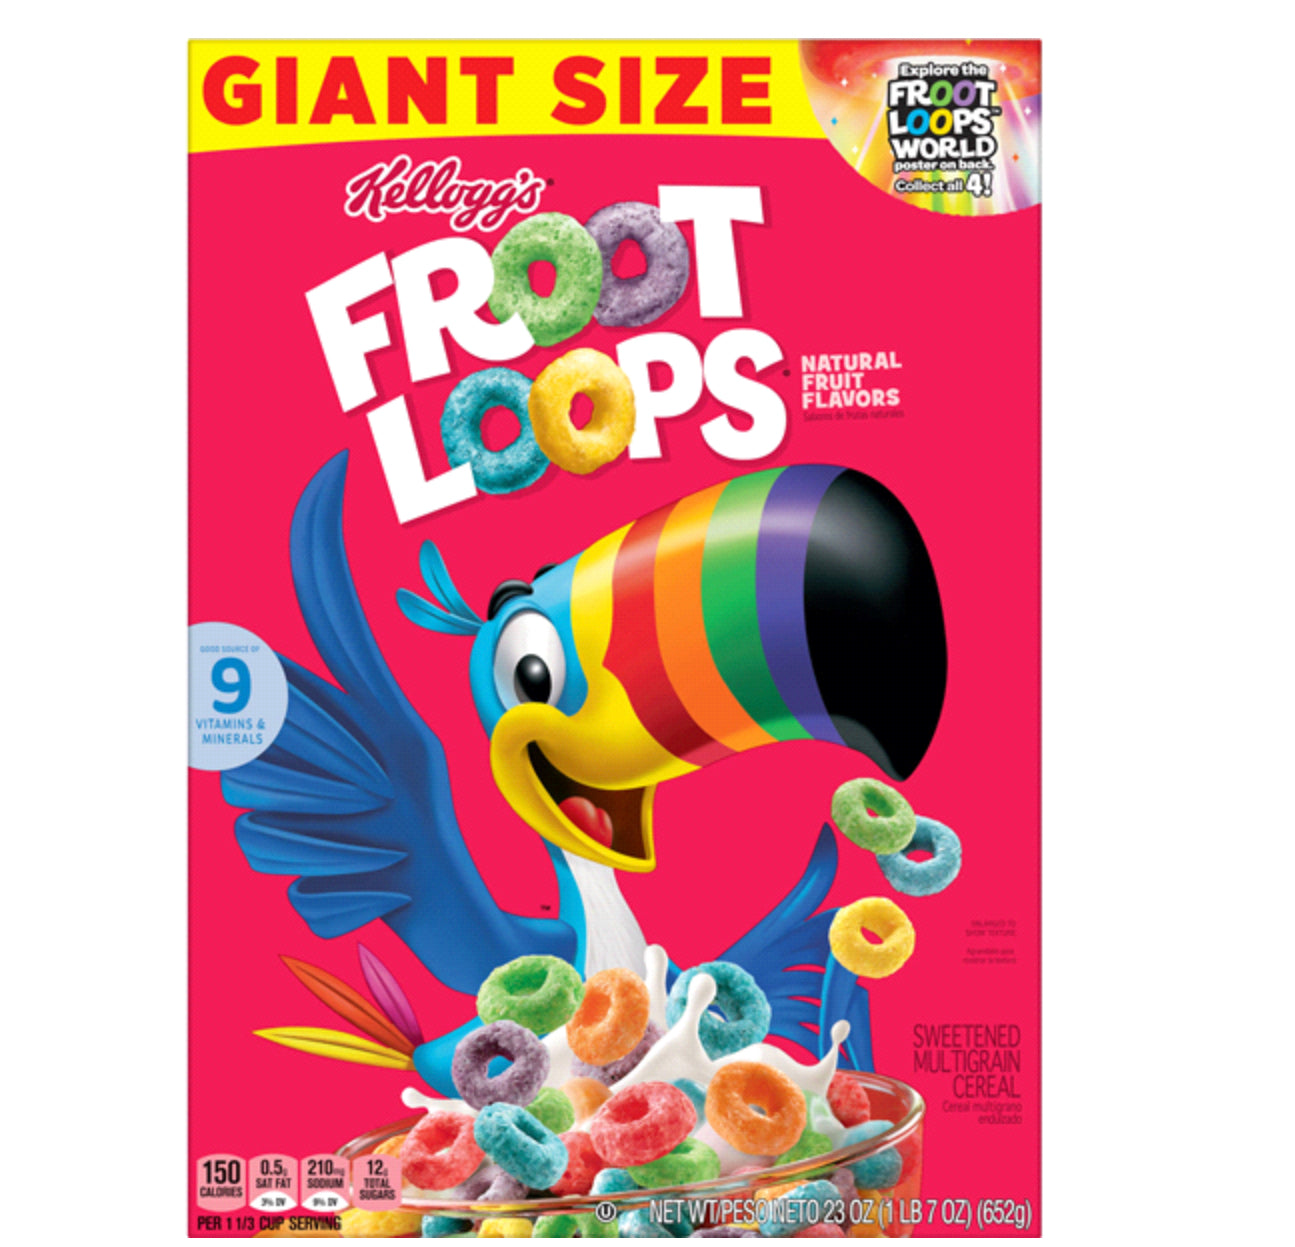 Kellogg's Froot Loops Family Size 23oz